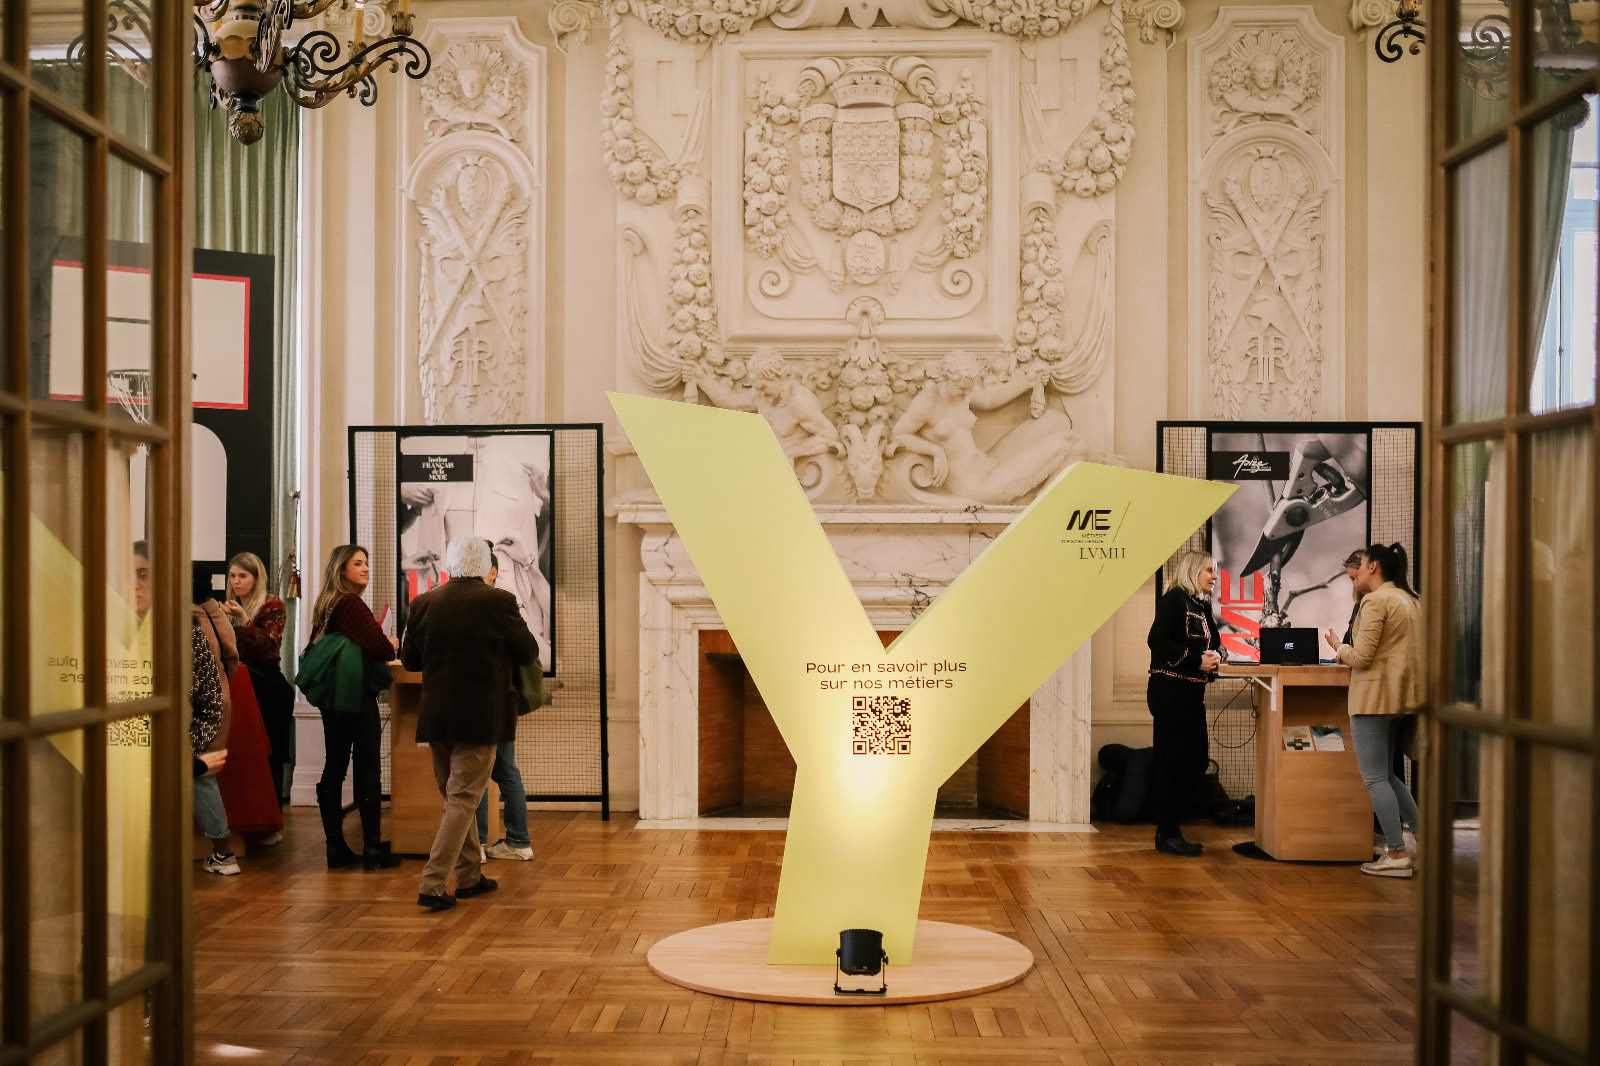 LVMH's Métiers d'Excellence goes on tour in Lyon and Florence for